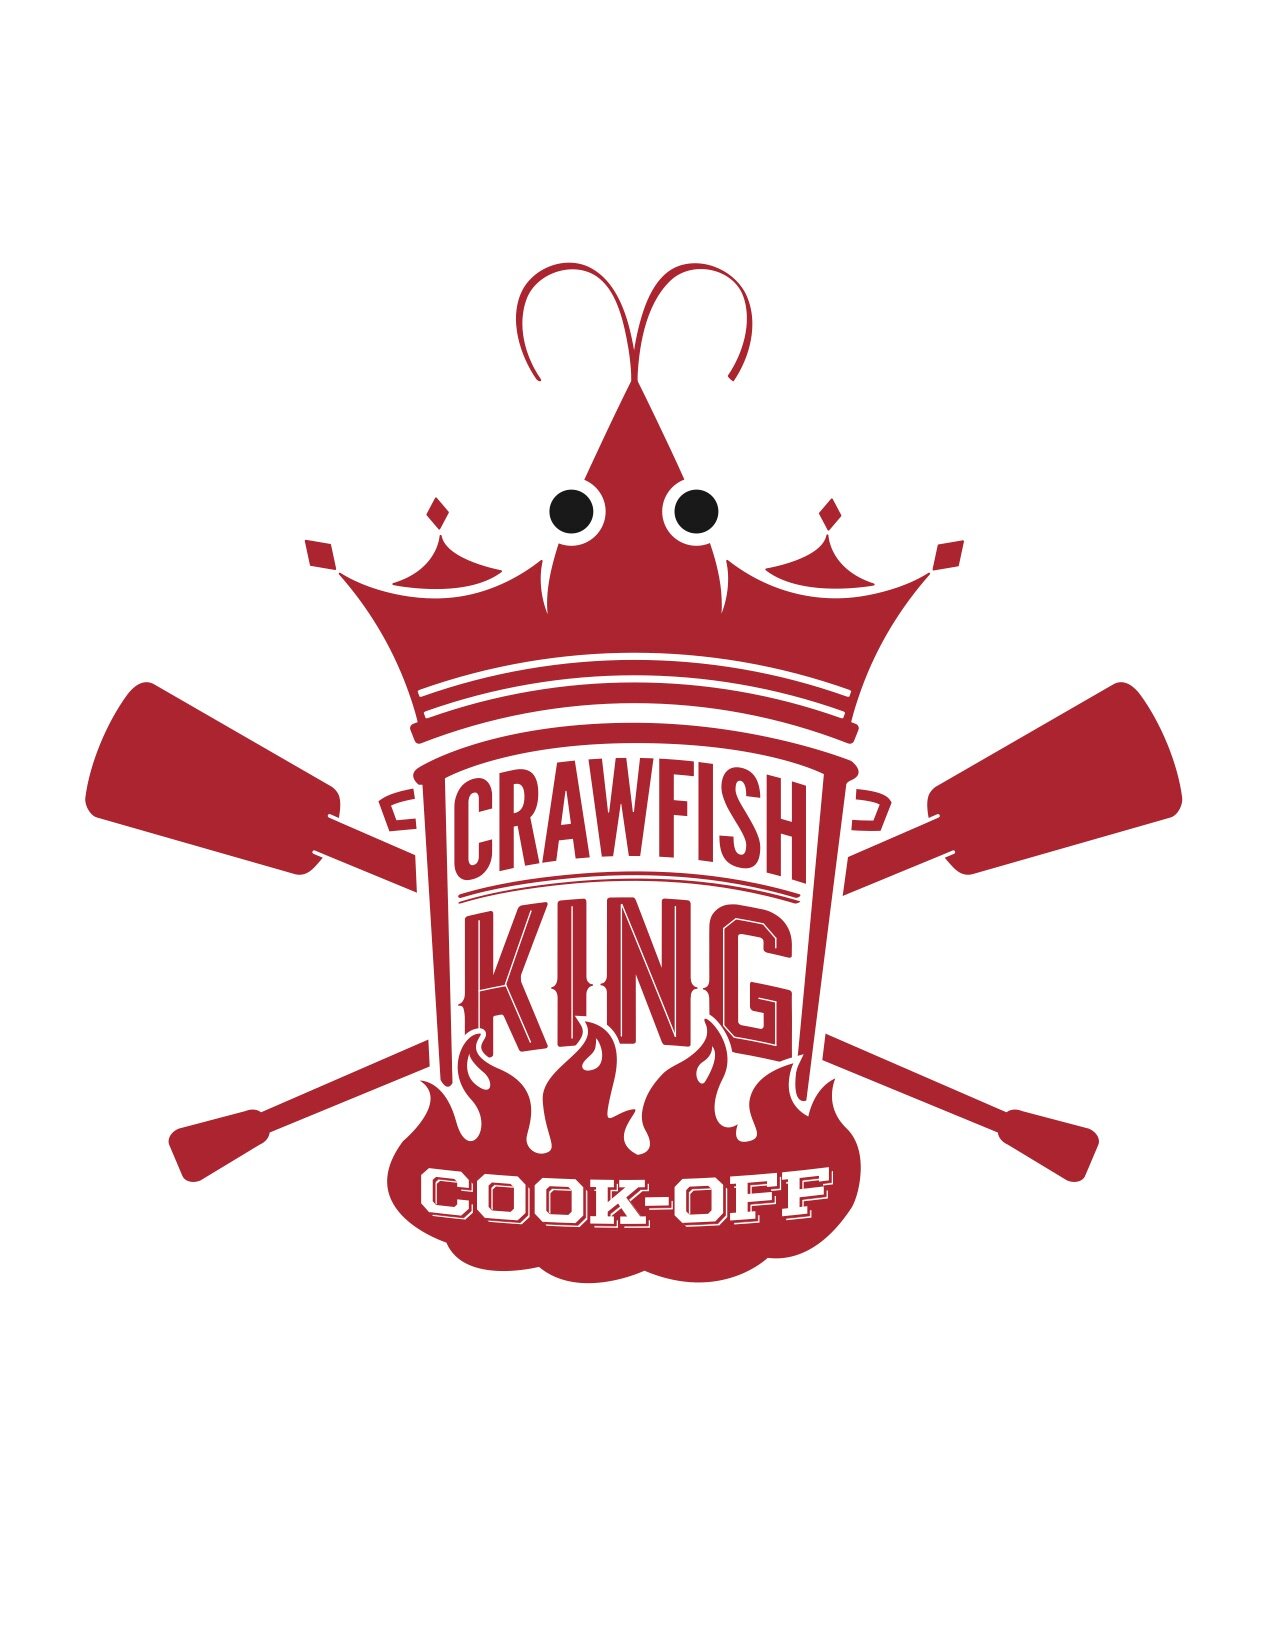 Crawfish boil competition-downtown Baton Rouge. May 5, 2023 #BoilEatGive benefitting Junior Achievement of Greater Baton Rouge and Big Buddy.